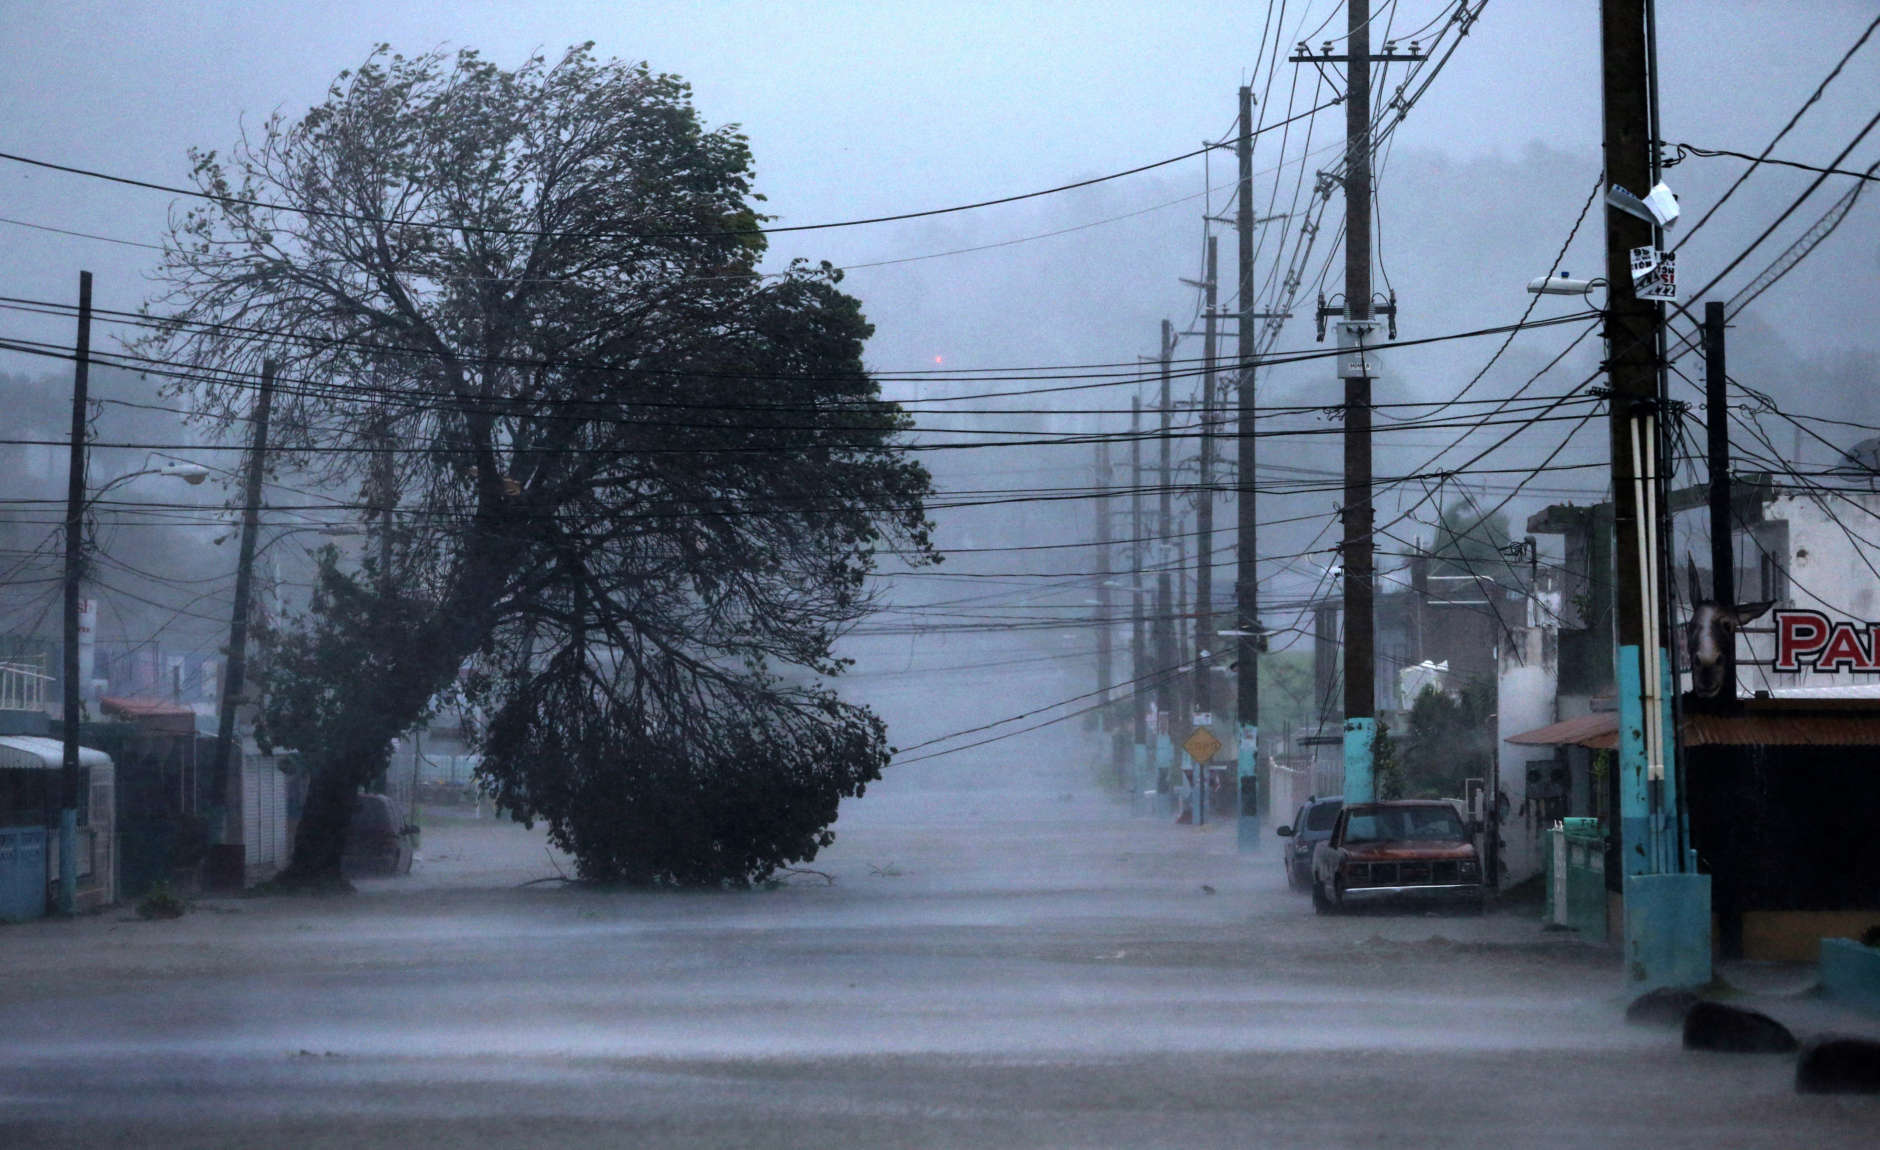 FAJARDO, PUERTO RICO - SEPTEMBER 06: A street is flooded during the passing of Hurricane Irma on September 6, 2017 in Fajardo, Puerto Rico. The category 5 storm is expected to pass over Puerto Rico and the Virgin Islands today, and make landfall in Florida by the weekend. (Photo by Jose Jimenez/Getty Images)